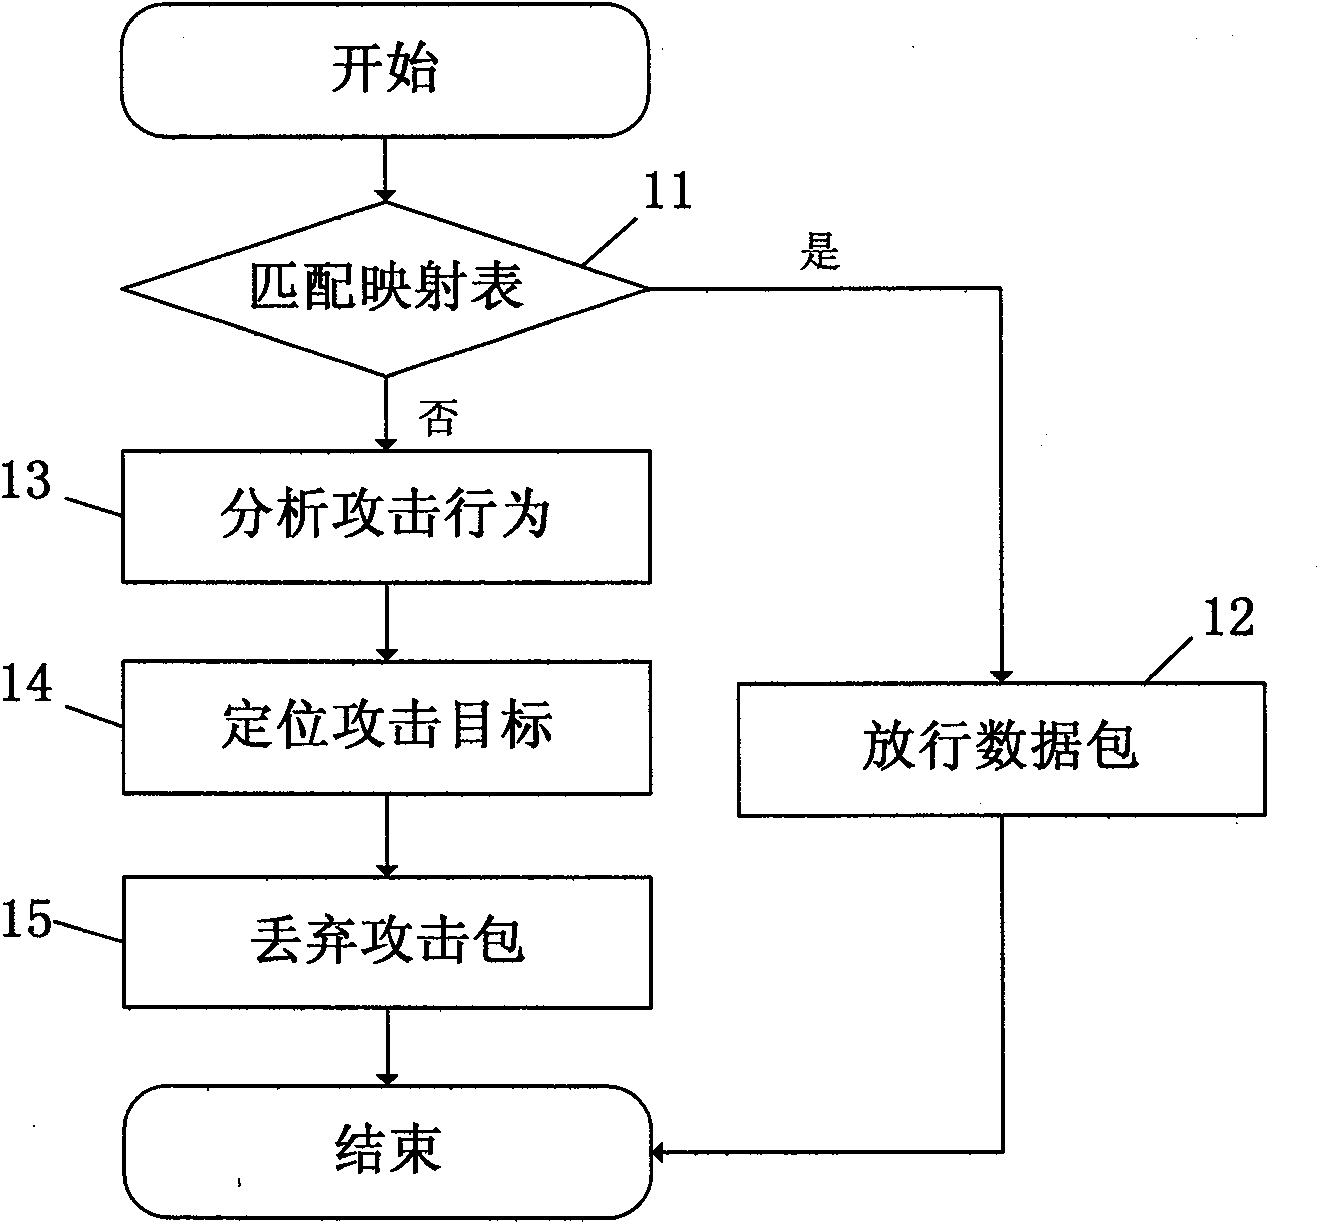 Method and system for preventing local area network ARP defection attacks